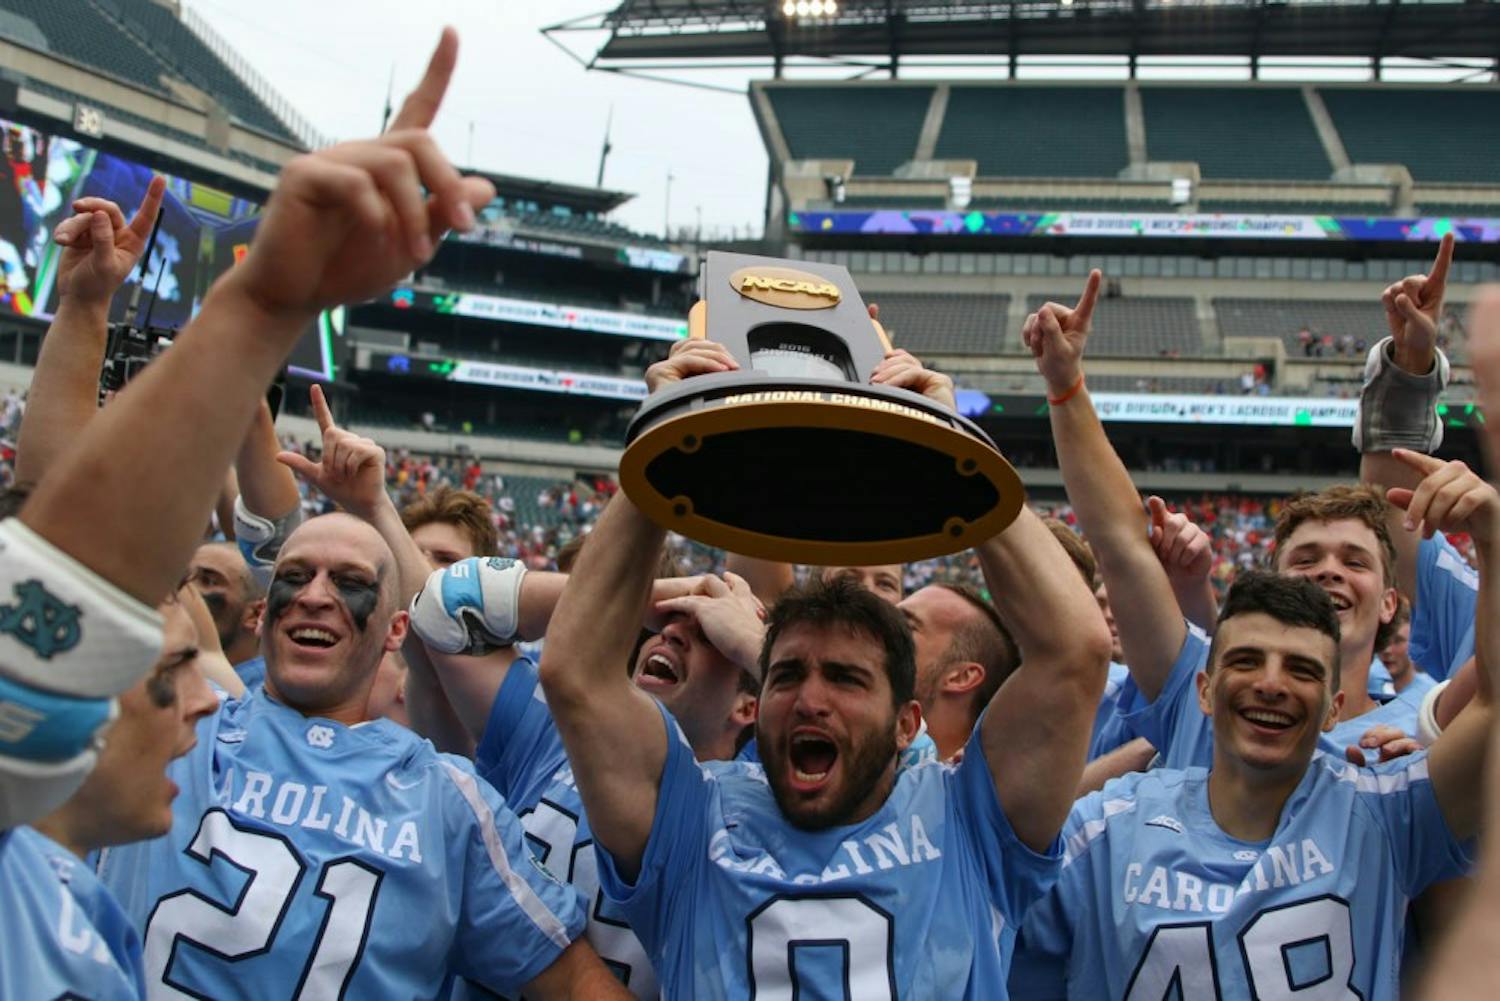 UNC attacker Steve Pontrello (0) hoists up the NCAA national championship trophy while his teammates celebrate around him.&nbsp;The unseeded North Carolina men's lacrosse team defeated No. 1 Maryland 14-13 in overtime to claim the program's first national championship since 1991 on Monday at Lincoln Financial Field in Philadelphia.